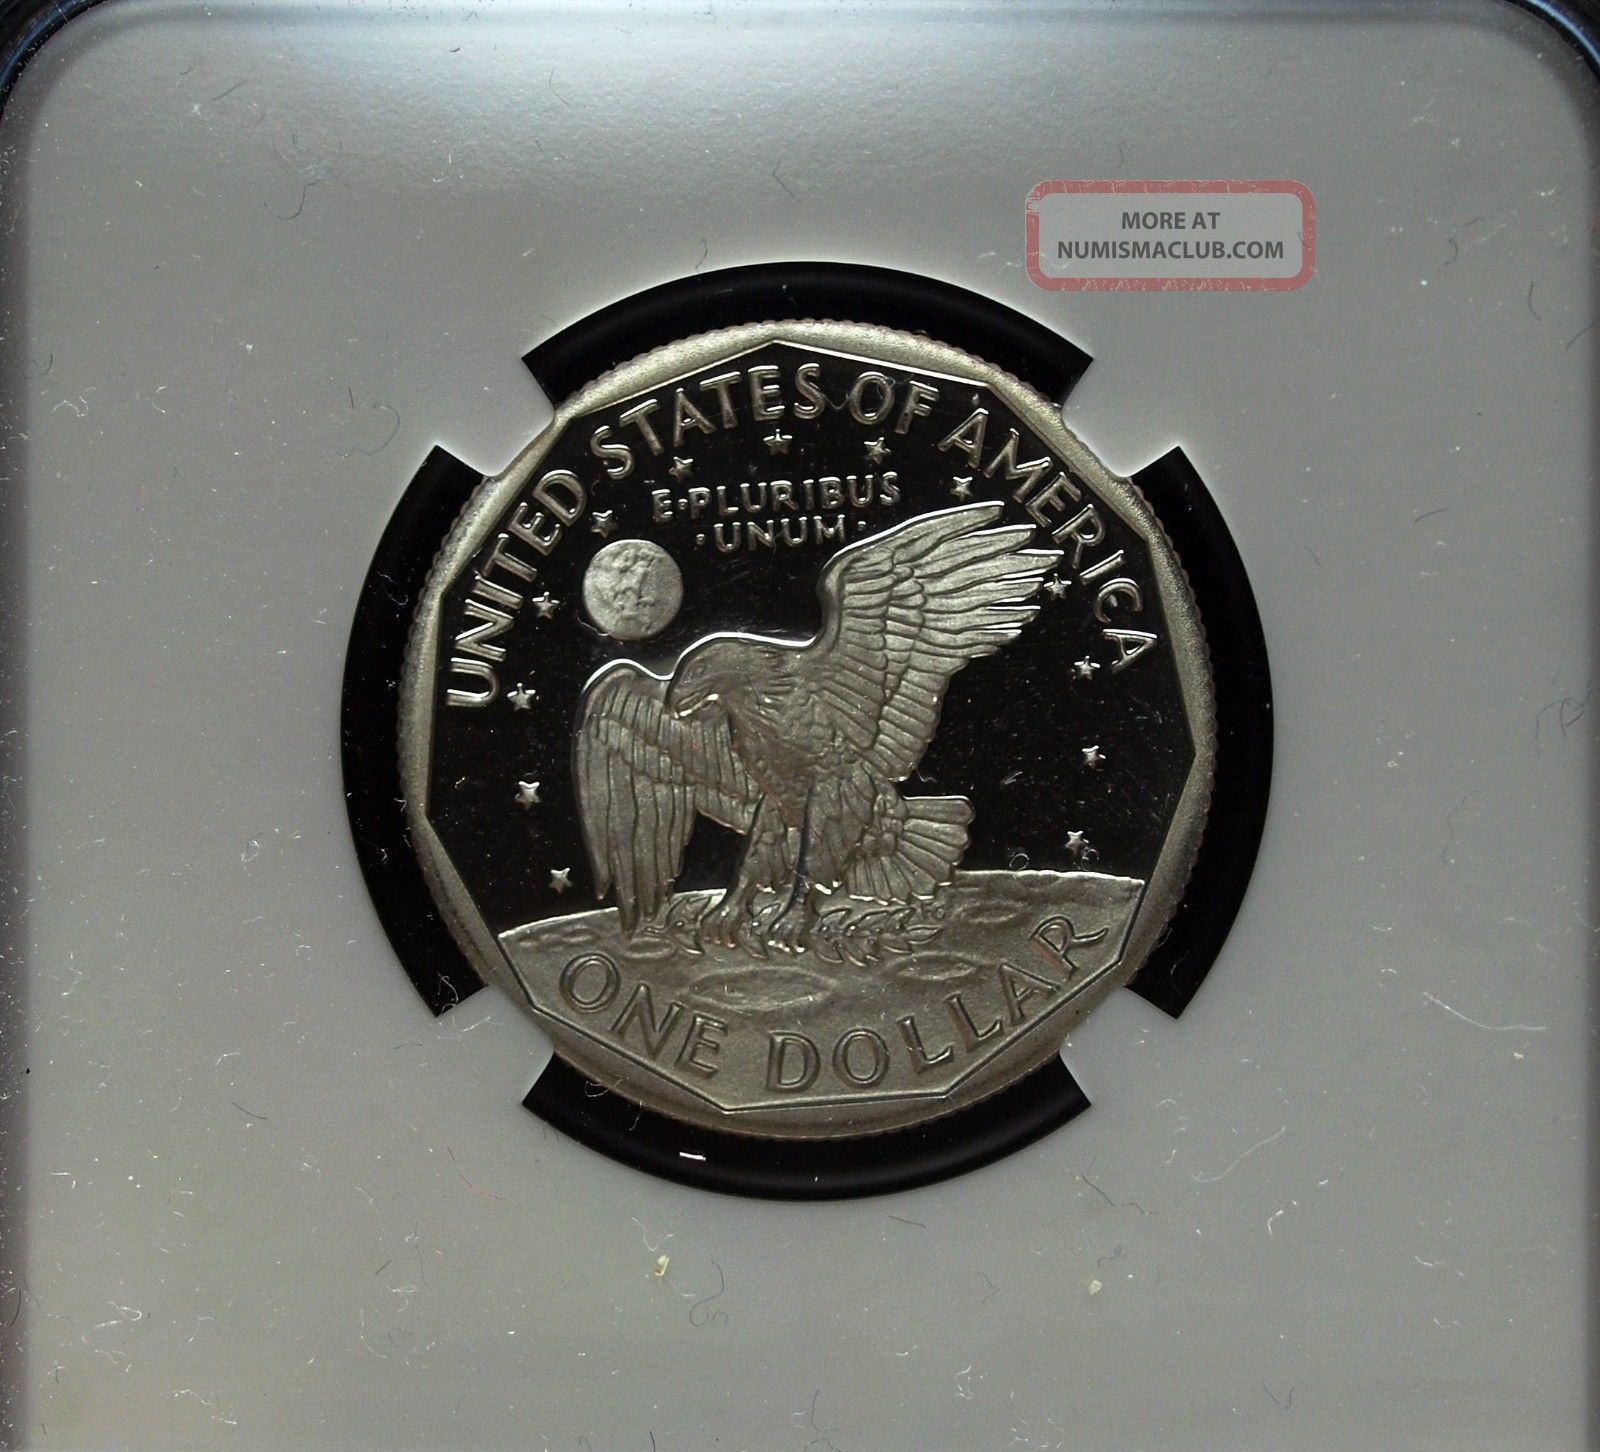 1981 S Ngc Type 2 Proof 69 Ultra Cameo Susan B. Anthony Dollar Gorgeous